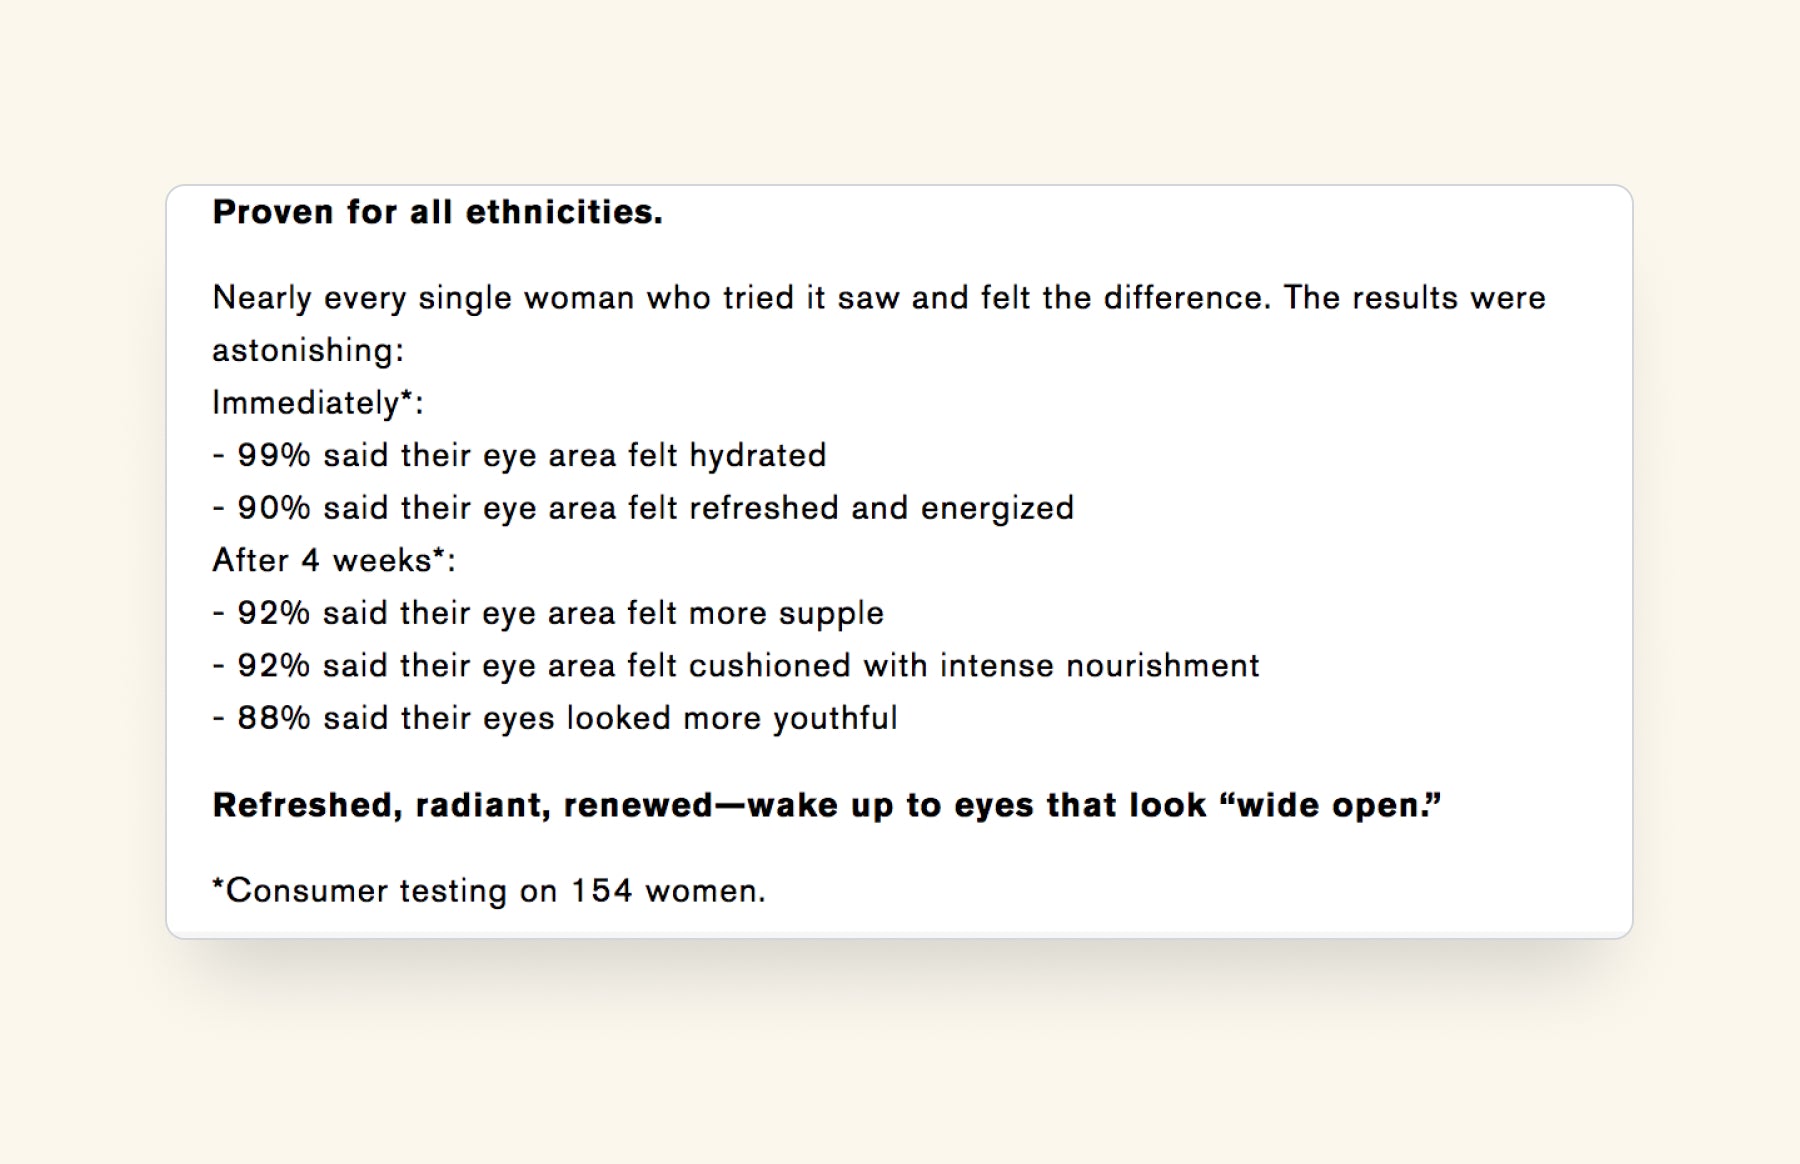 list of results for women of all ethnicities including hydrated eye area and more youthful looking eyes